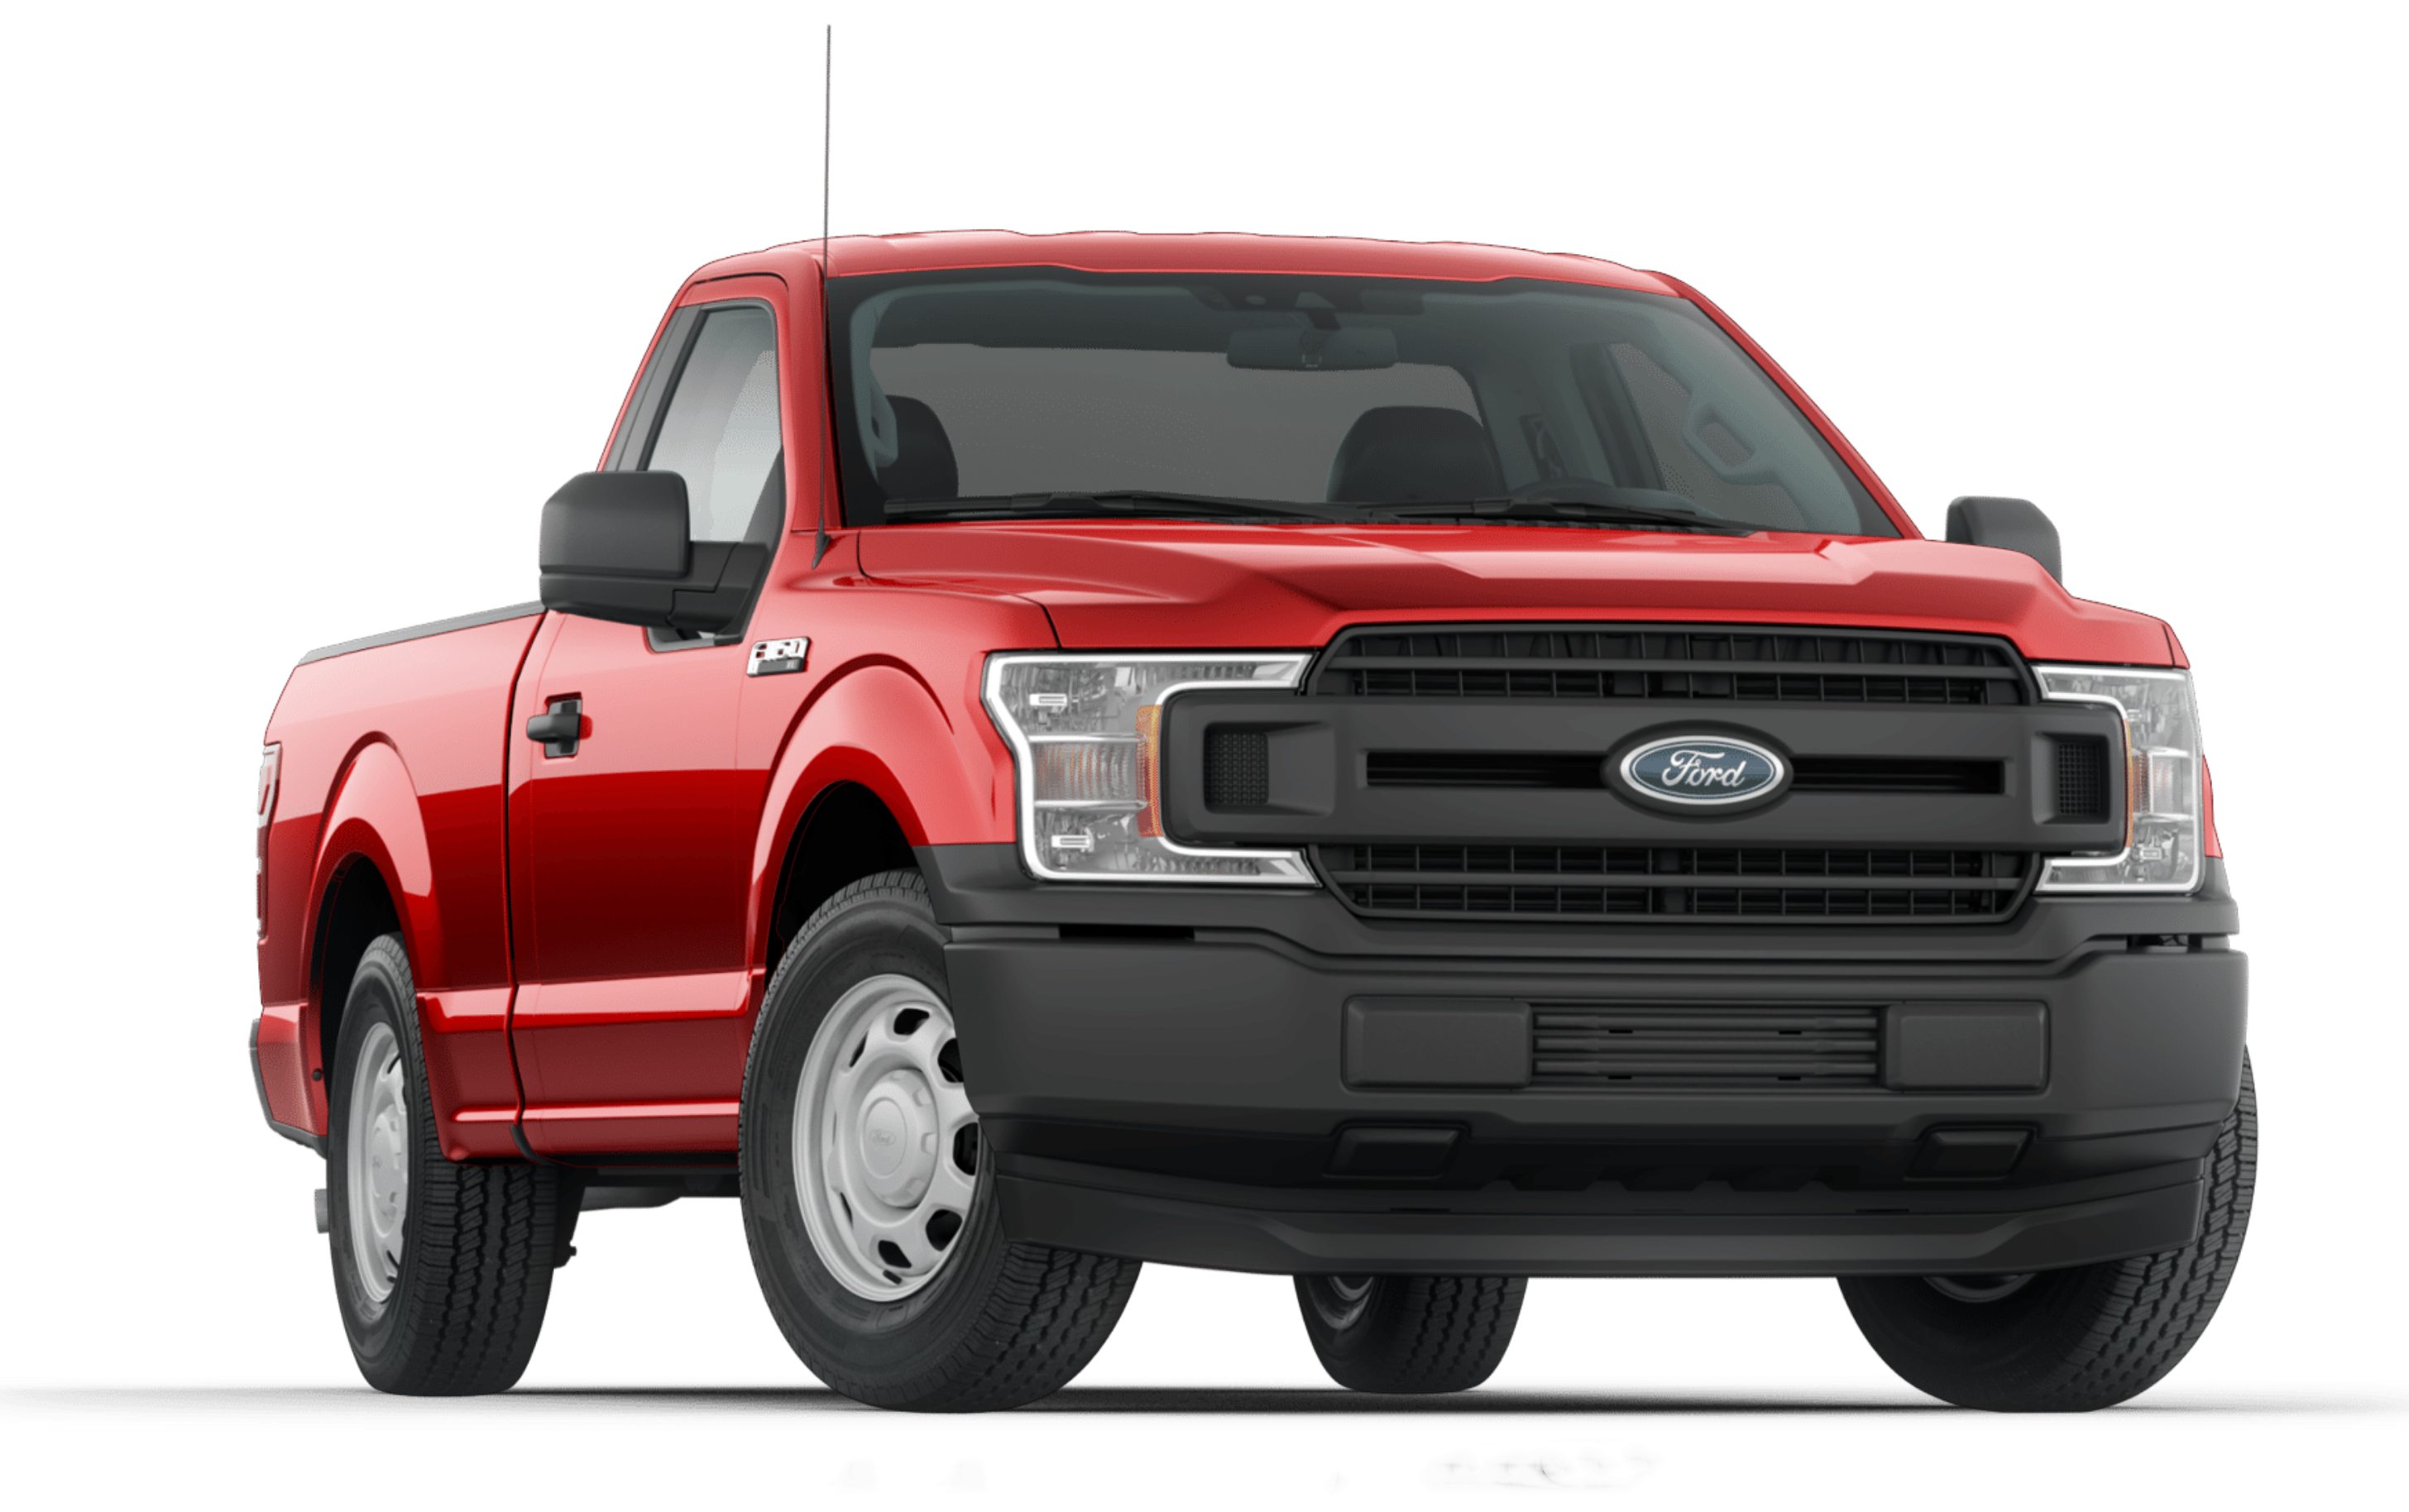 Buying a Truck Crew Cab, Extended Cab, or Regular Cab